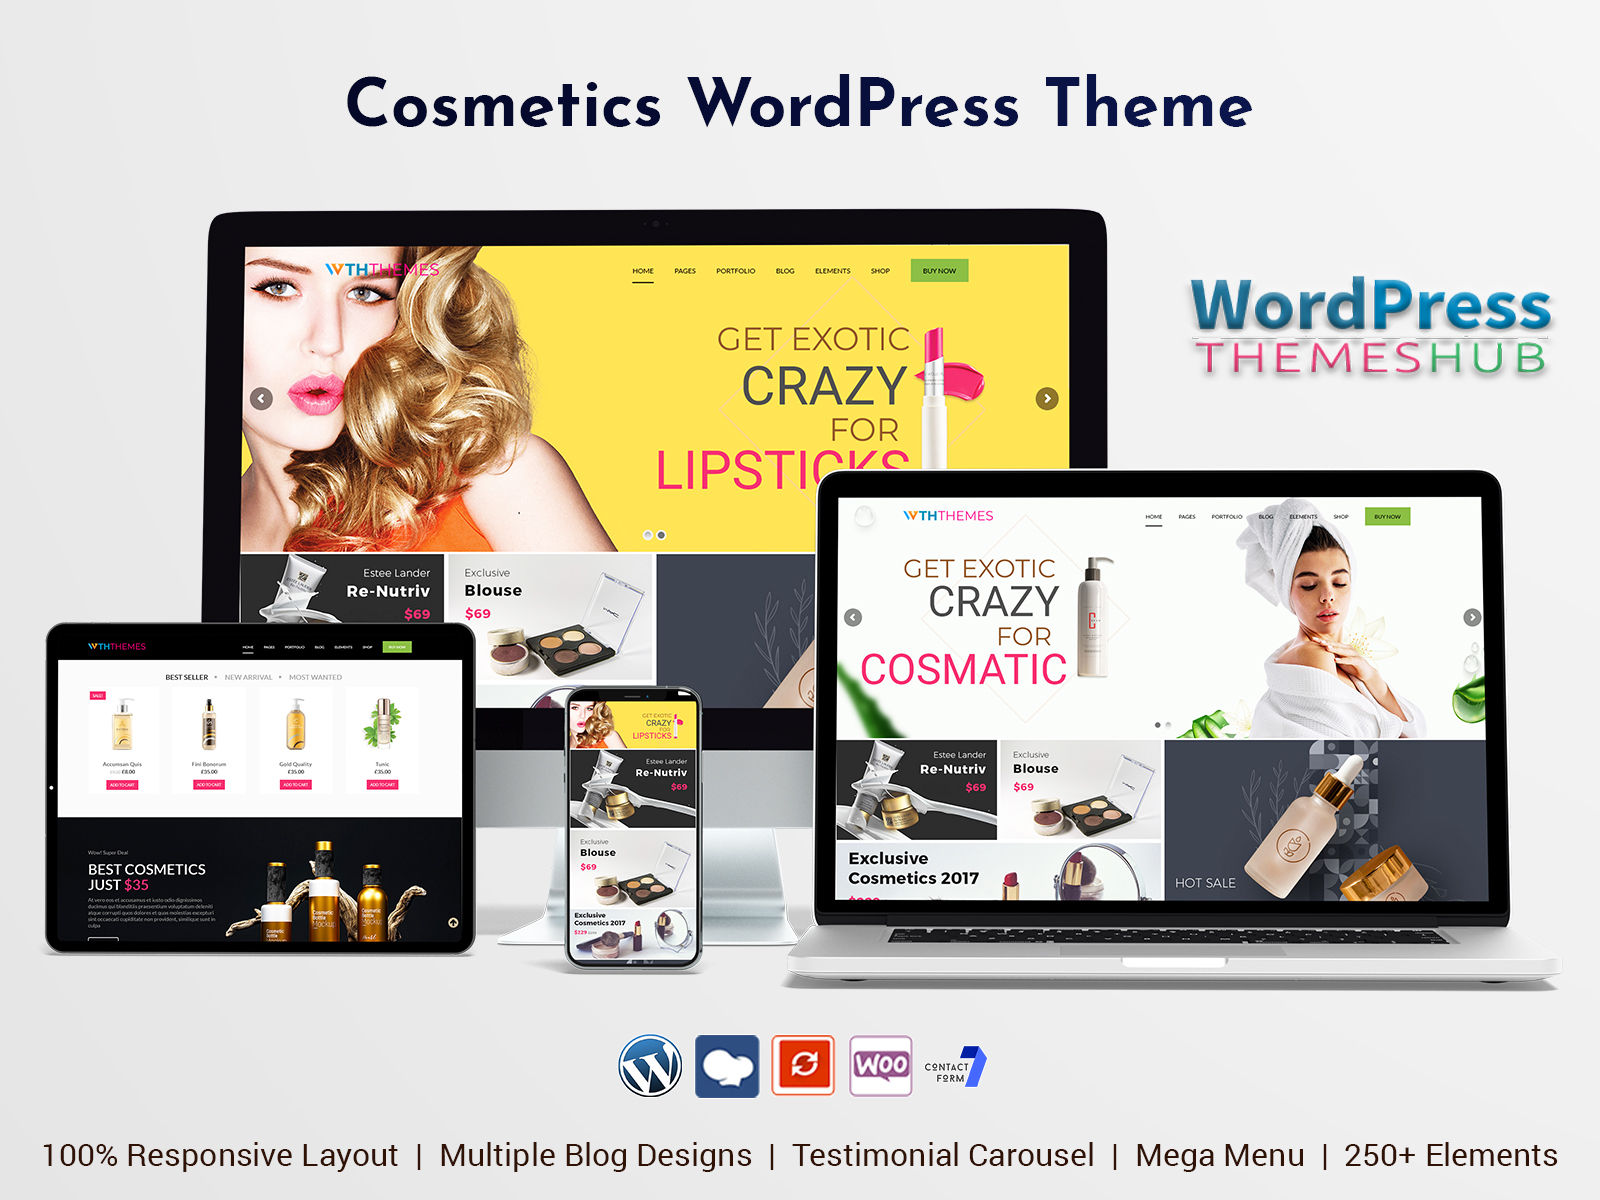 Cosmetics WordPress Themes To Develop Your Website Or Online Business